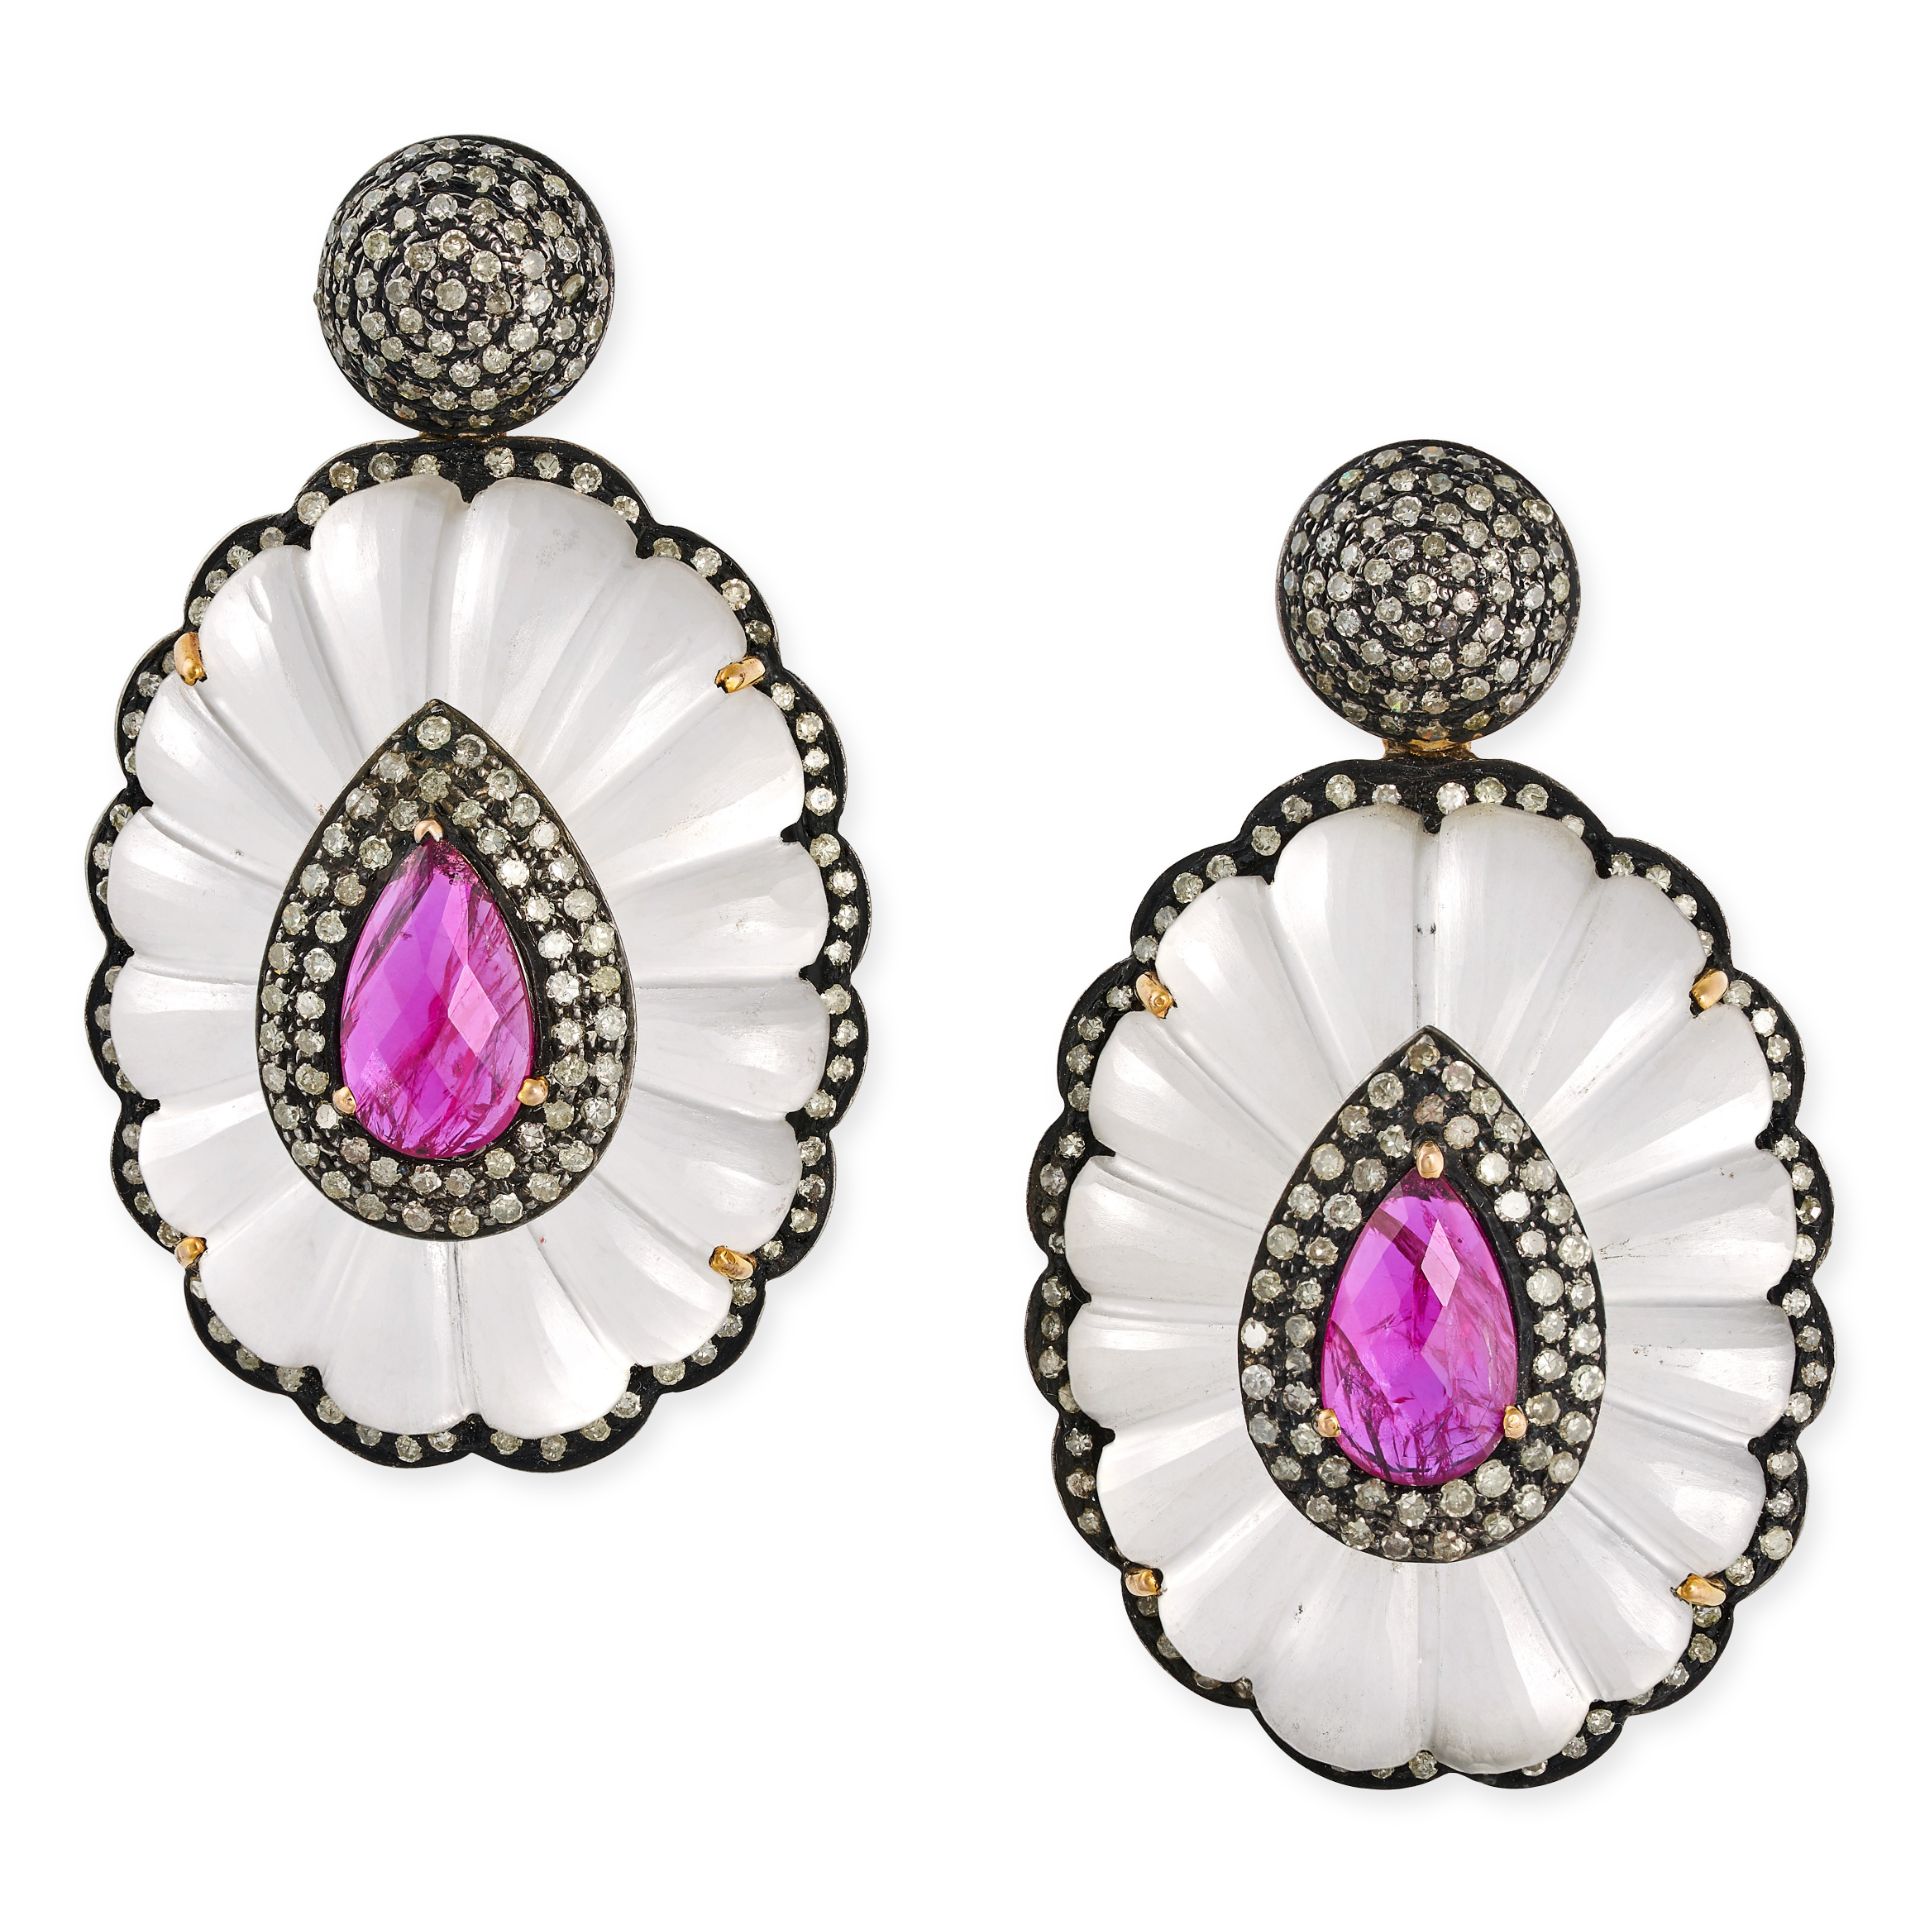 A PAIR OF ROCK CRYSTAL, RUBELITE TOURMALINE, AND DIAMOND EARRINGS in 14 carat yellow and blackene...